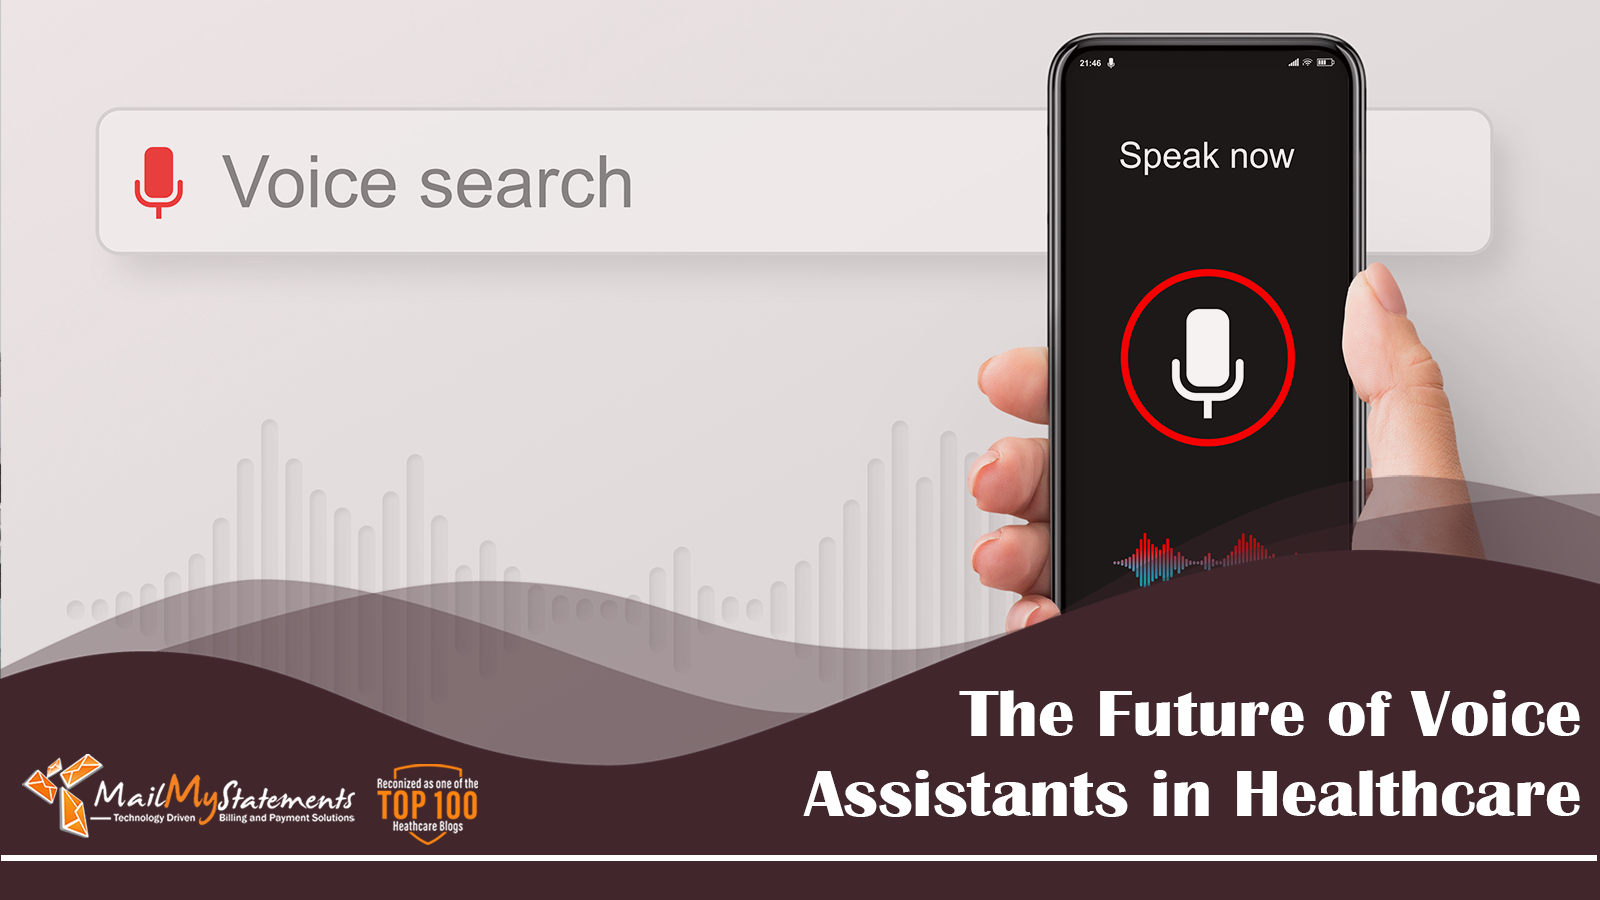 The Future of Voice Assistants in Healthcare